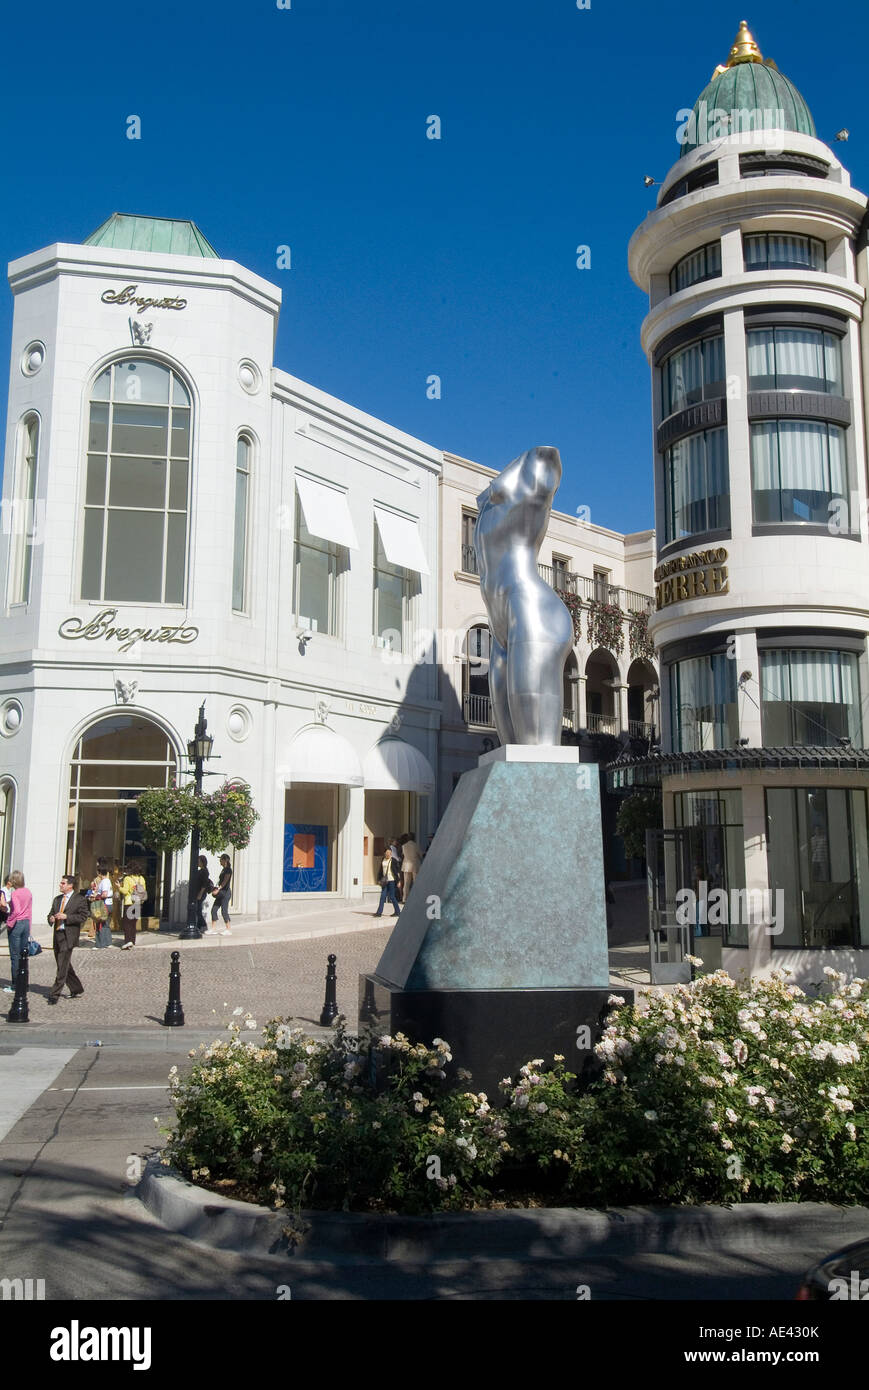 Rodeo Drive, Beverly Hills 10.14.23 by makepictures on DeviantArt